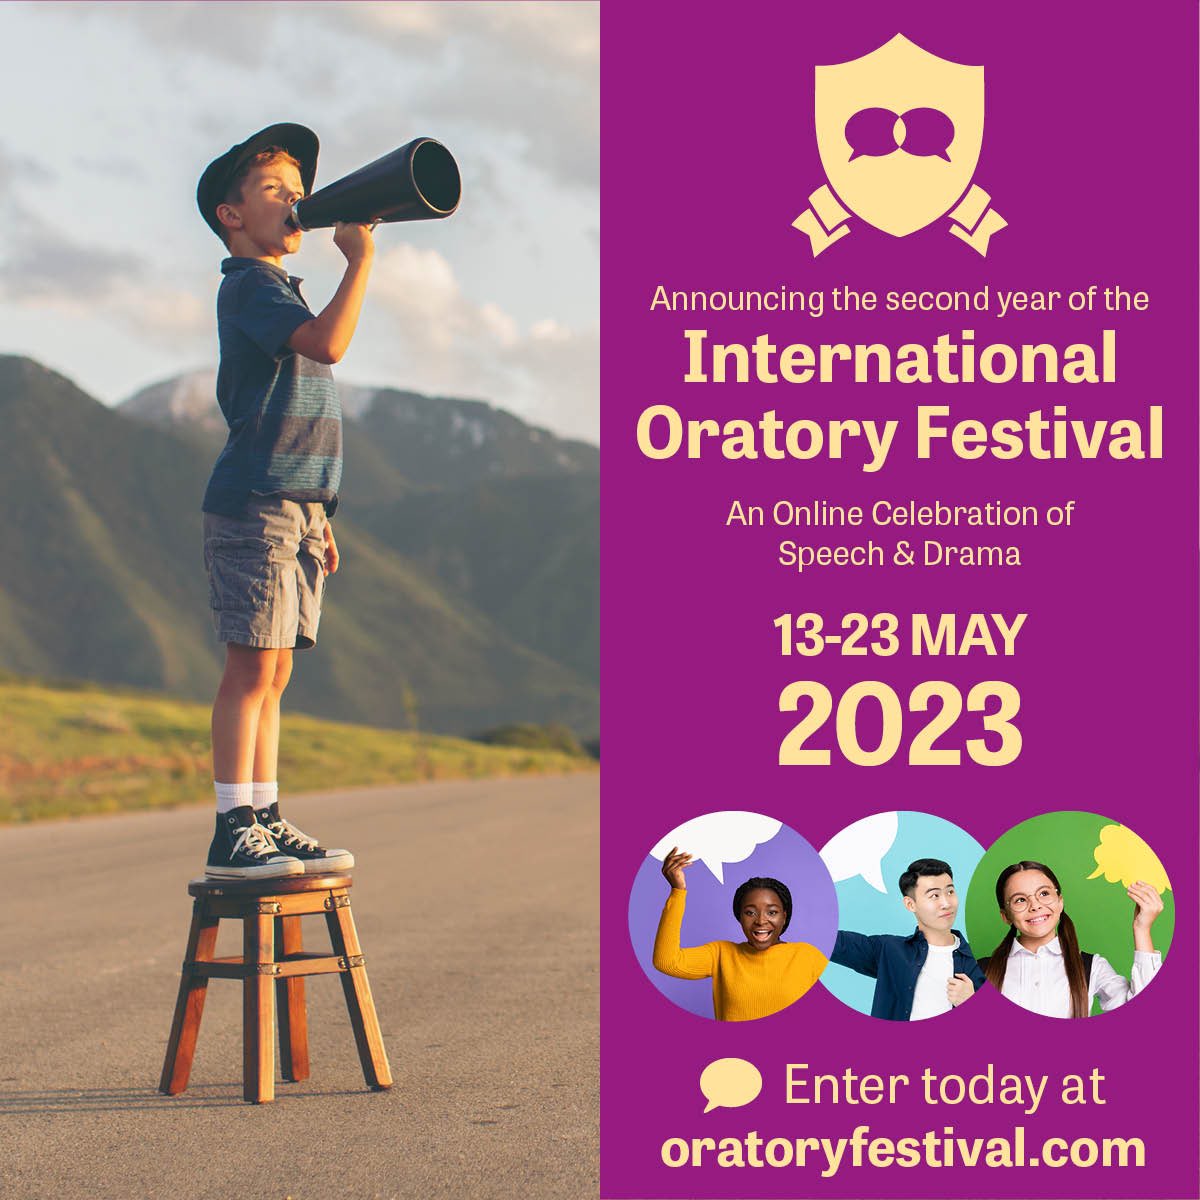 Registration for the 2023 International Oratory Festival is now open to pupils aged 6-18, anyway in the world! For more details and to sign up, visit oratoryfestival.com          #oracy #speechanddrama #speechanddebate